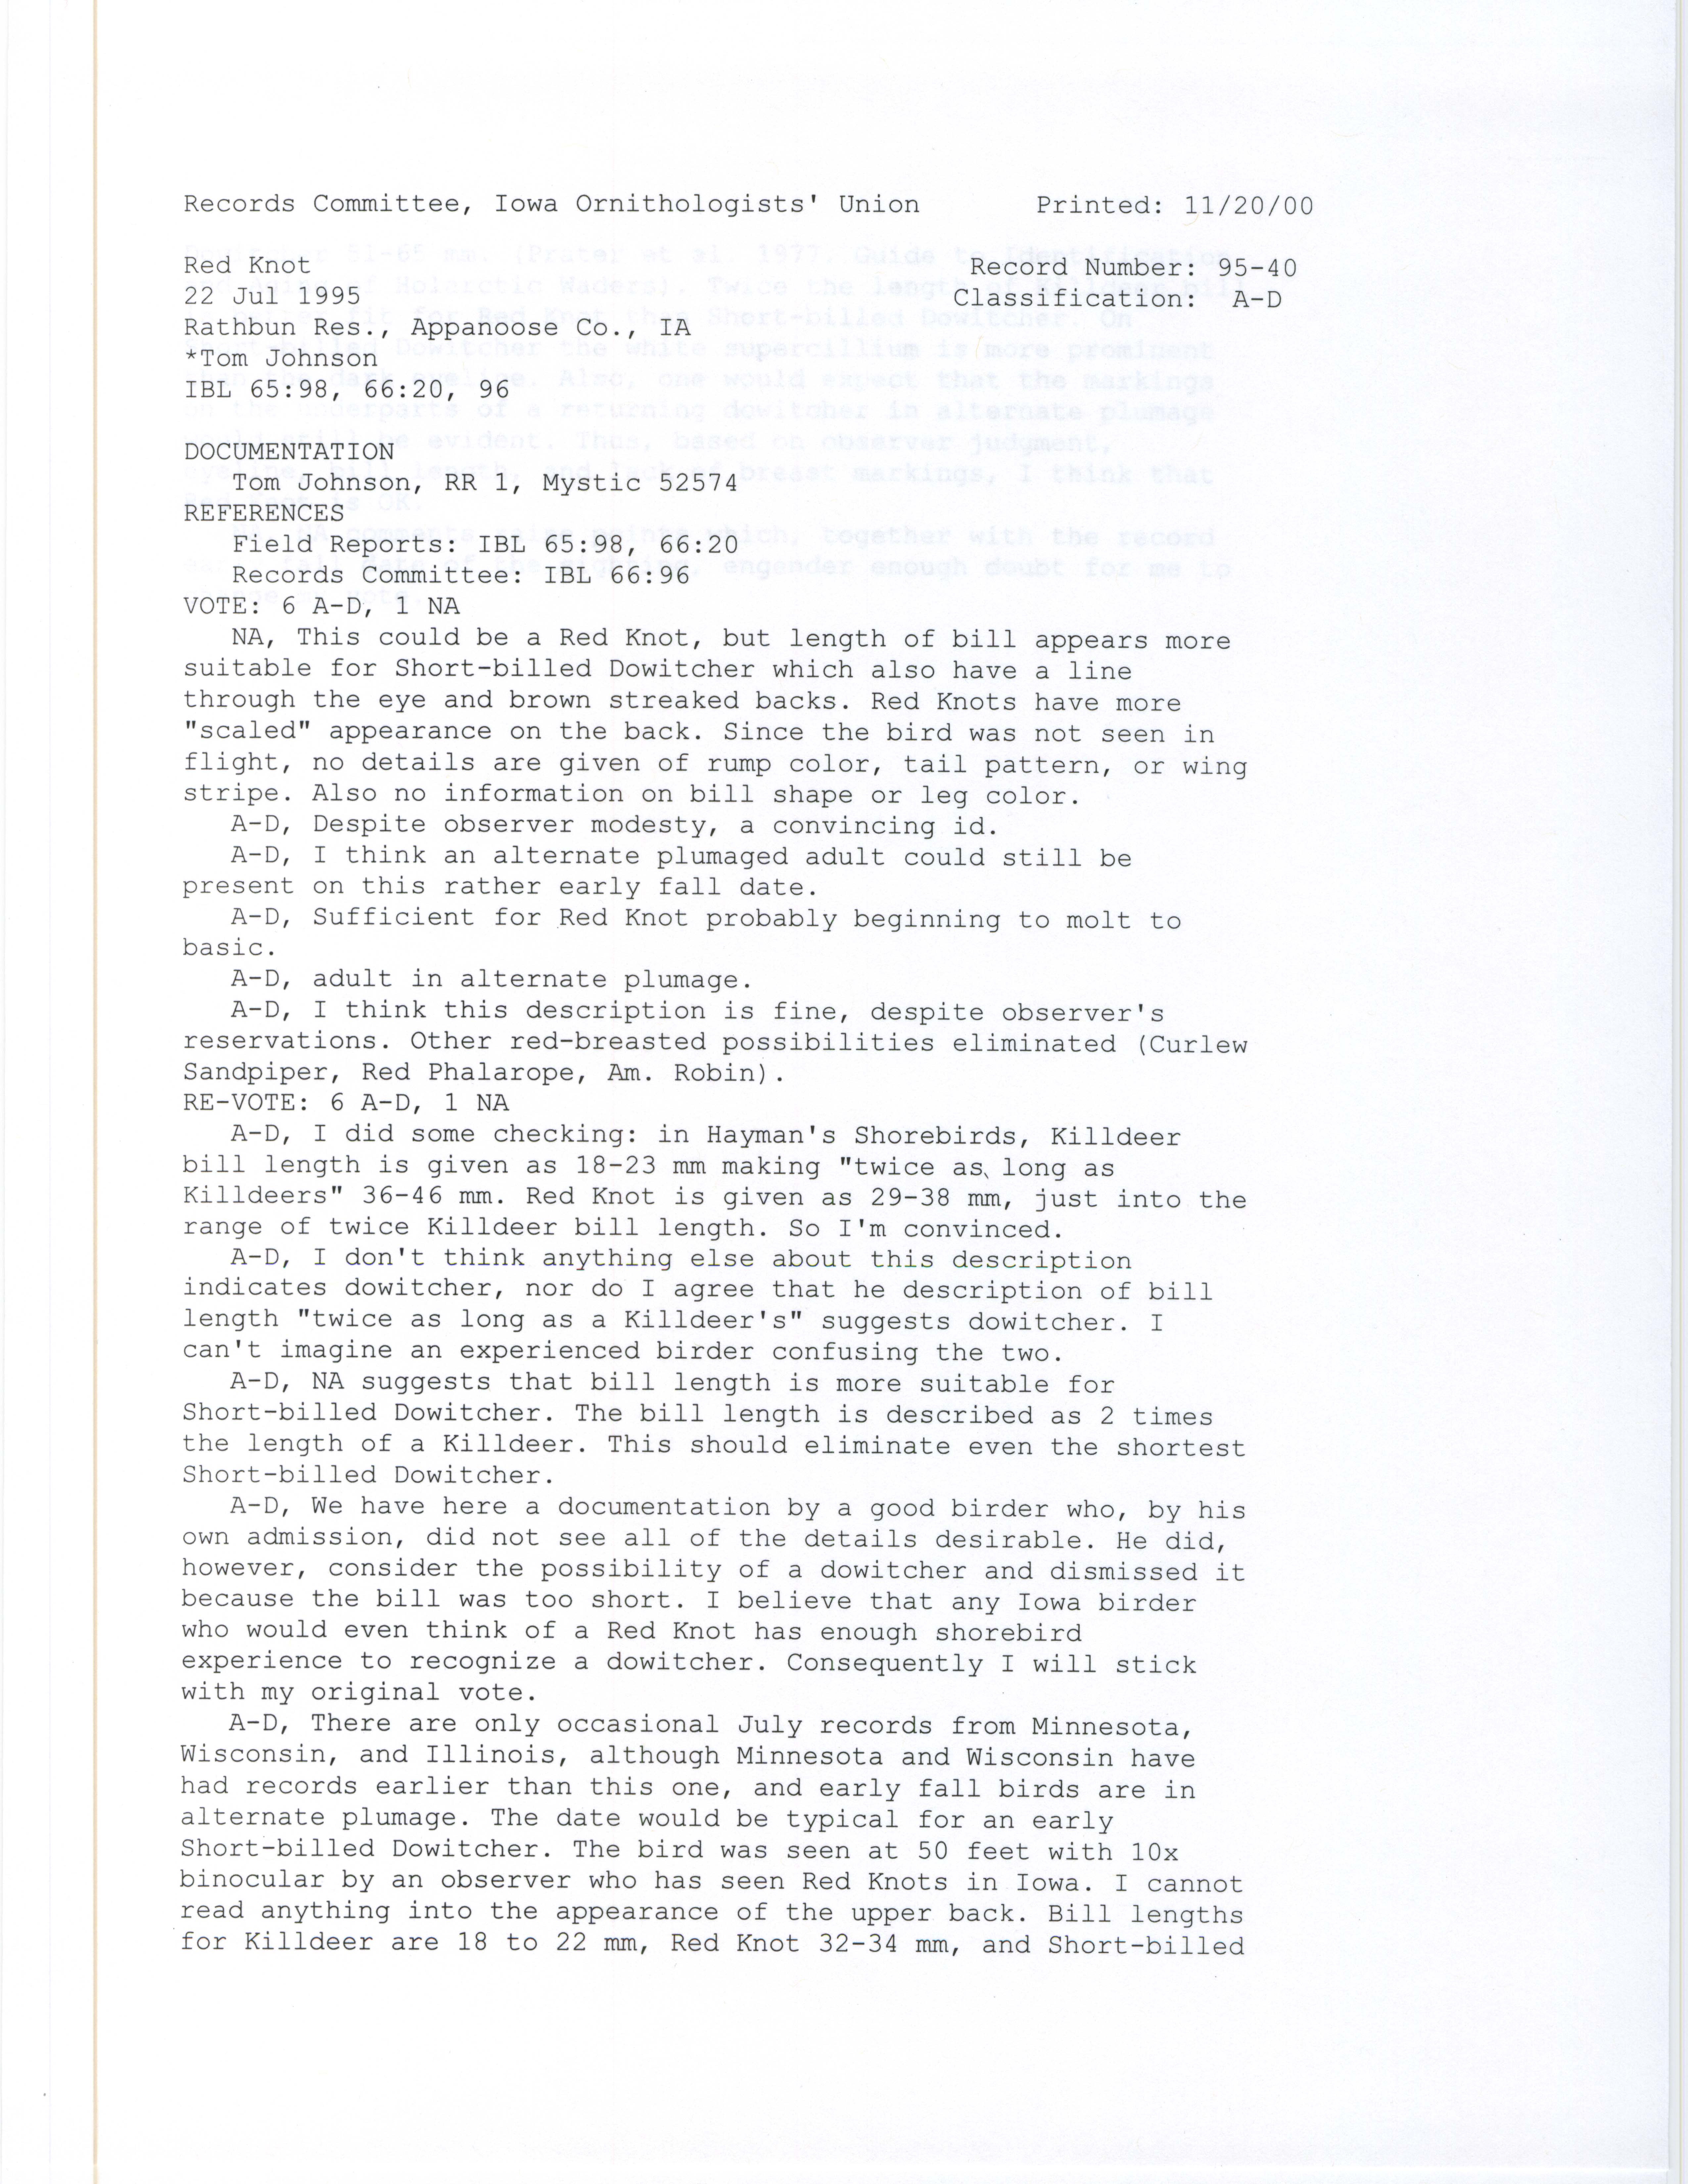 Records Committee review for rare bird sighting for Red Knot at Rathbun Reservoir, 1995